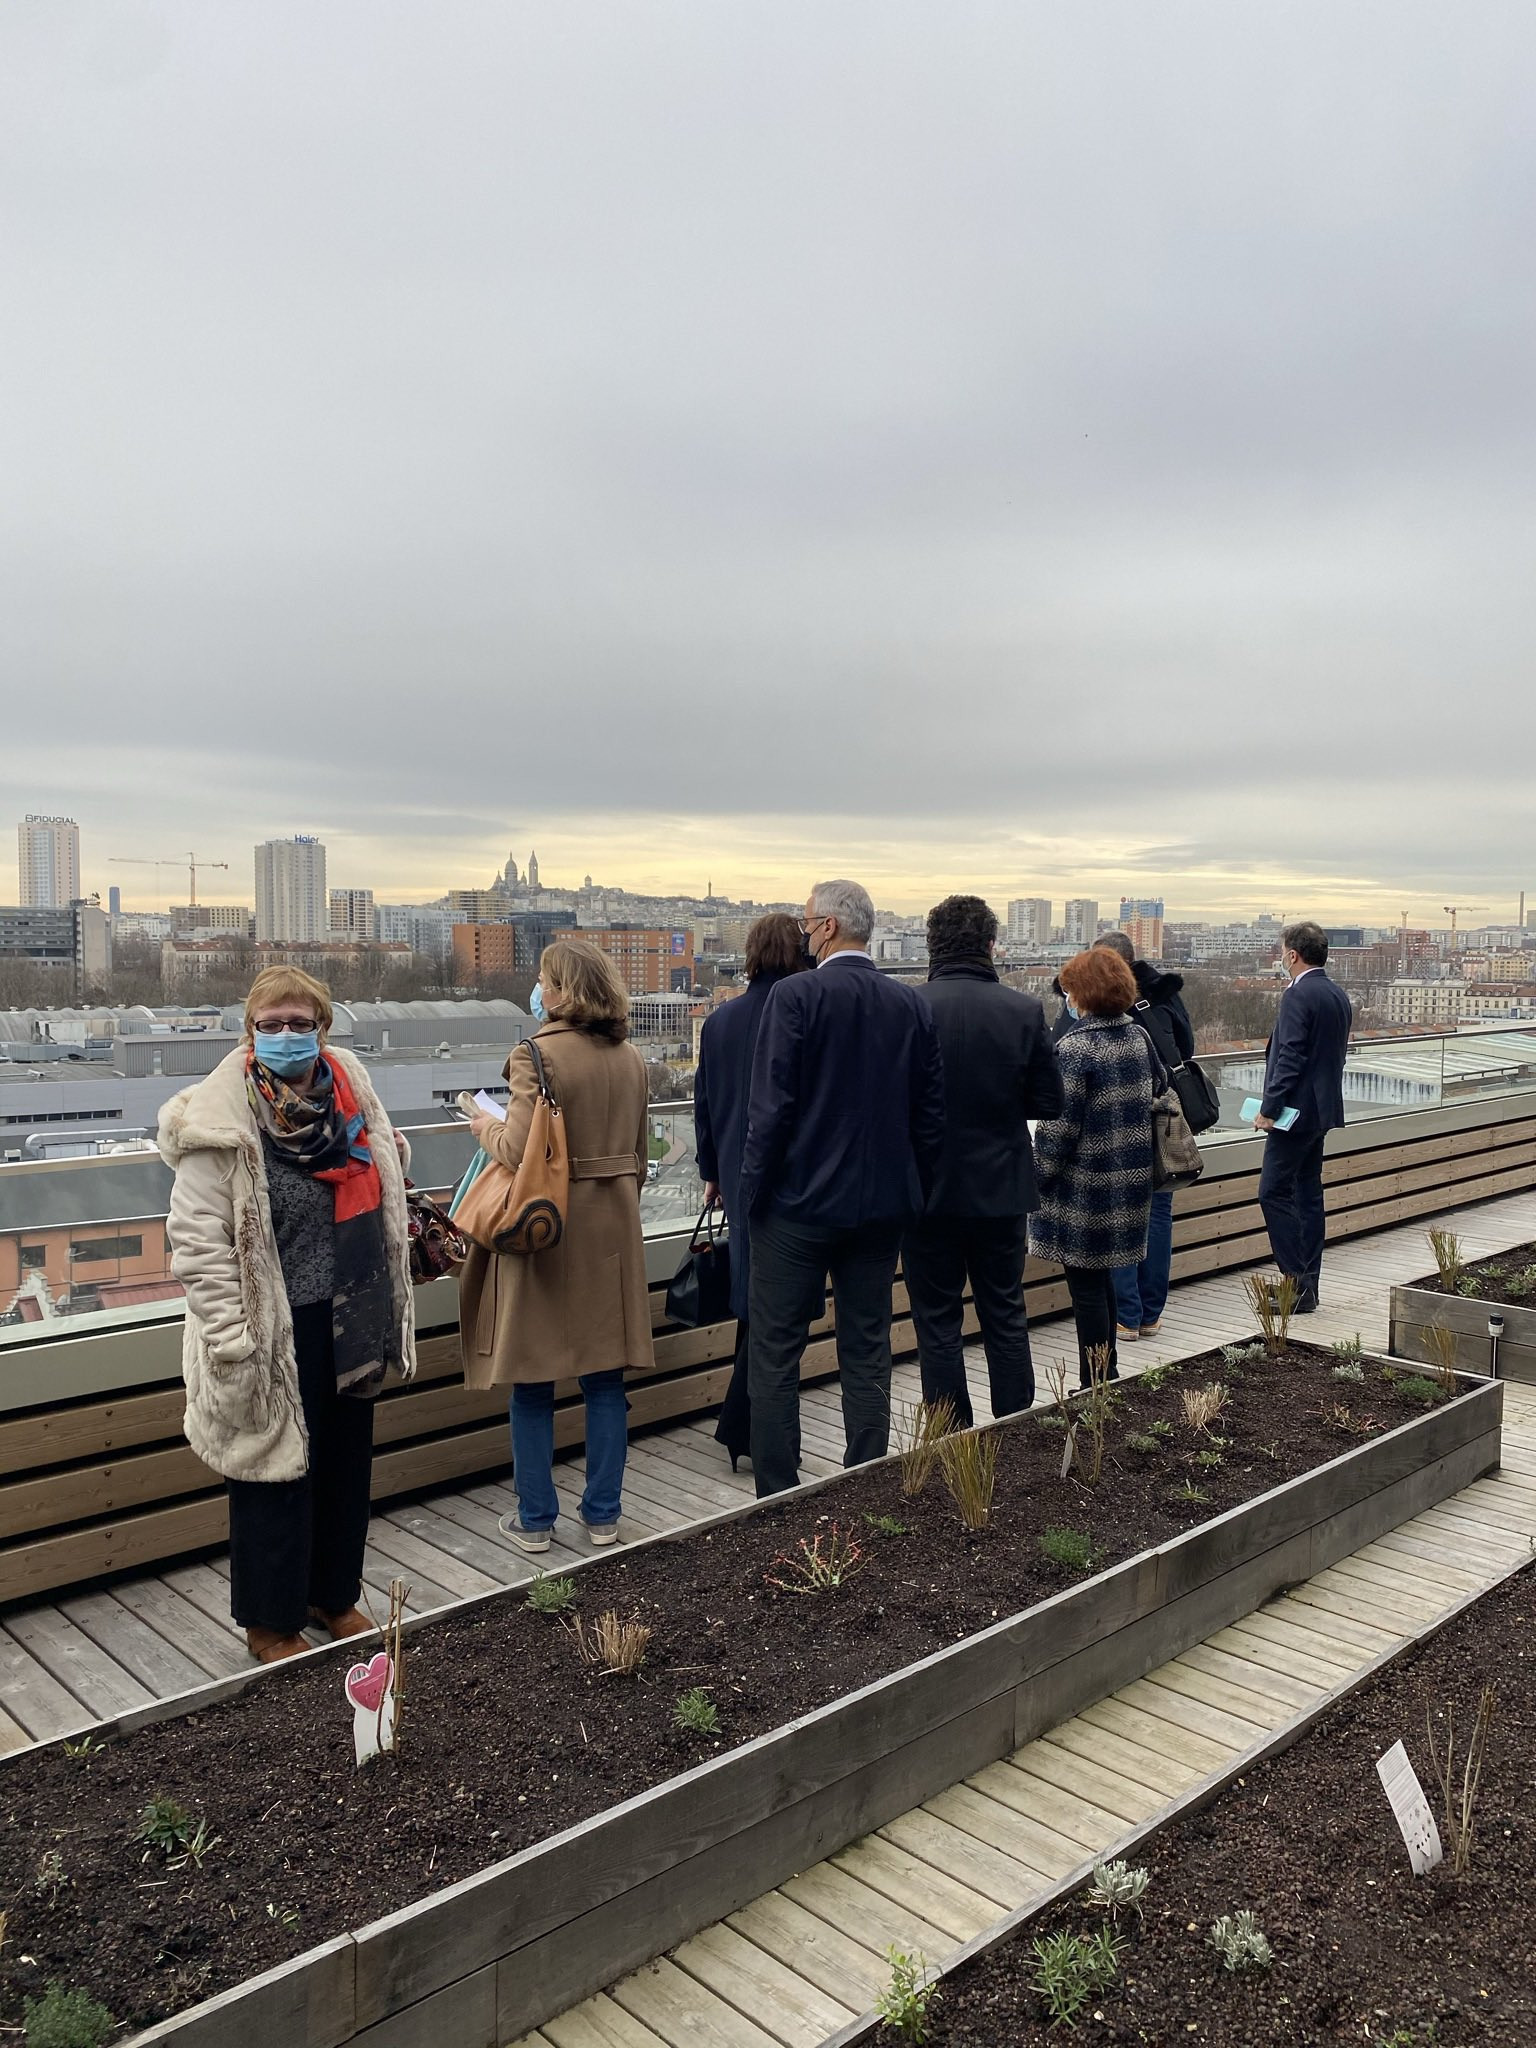 The new Paris 2024 Organising Committee headquarters has a herb garden on the roof ©Twitter